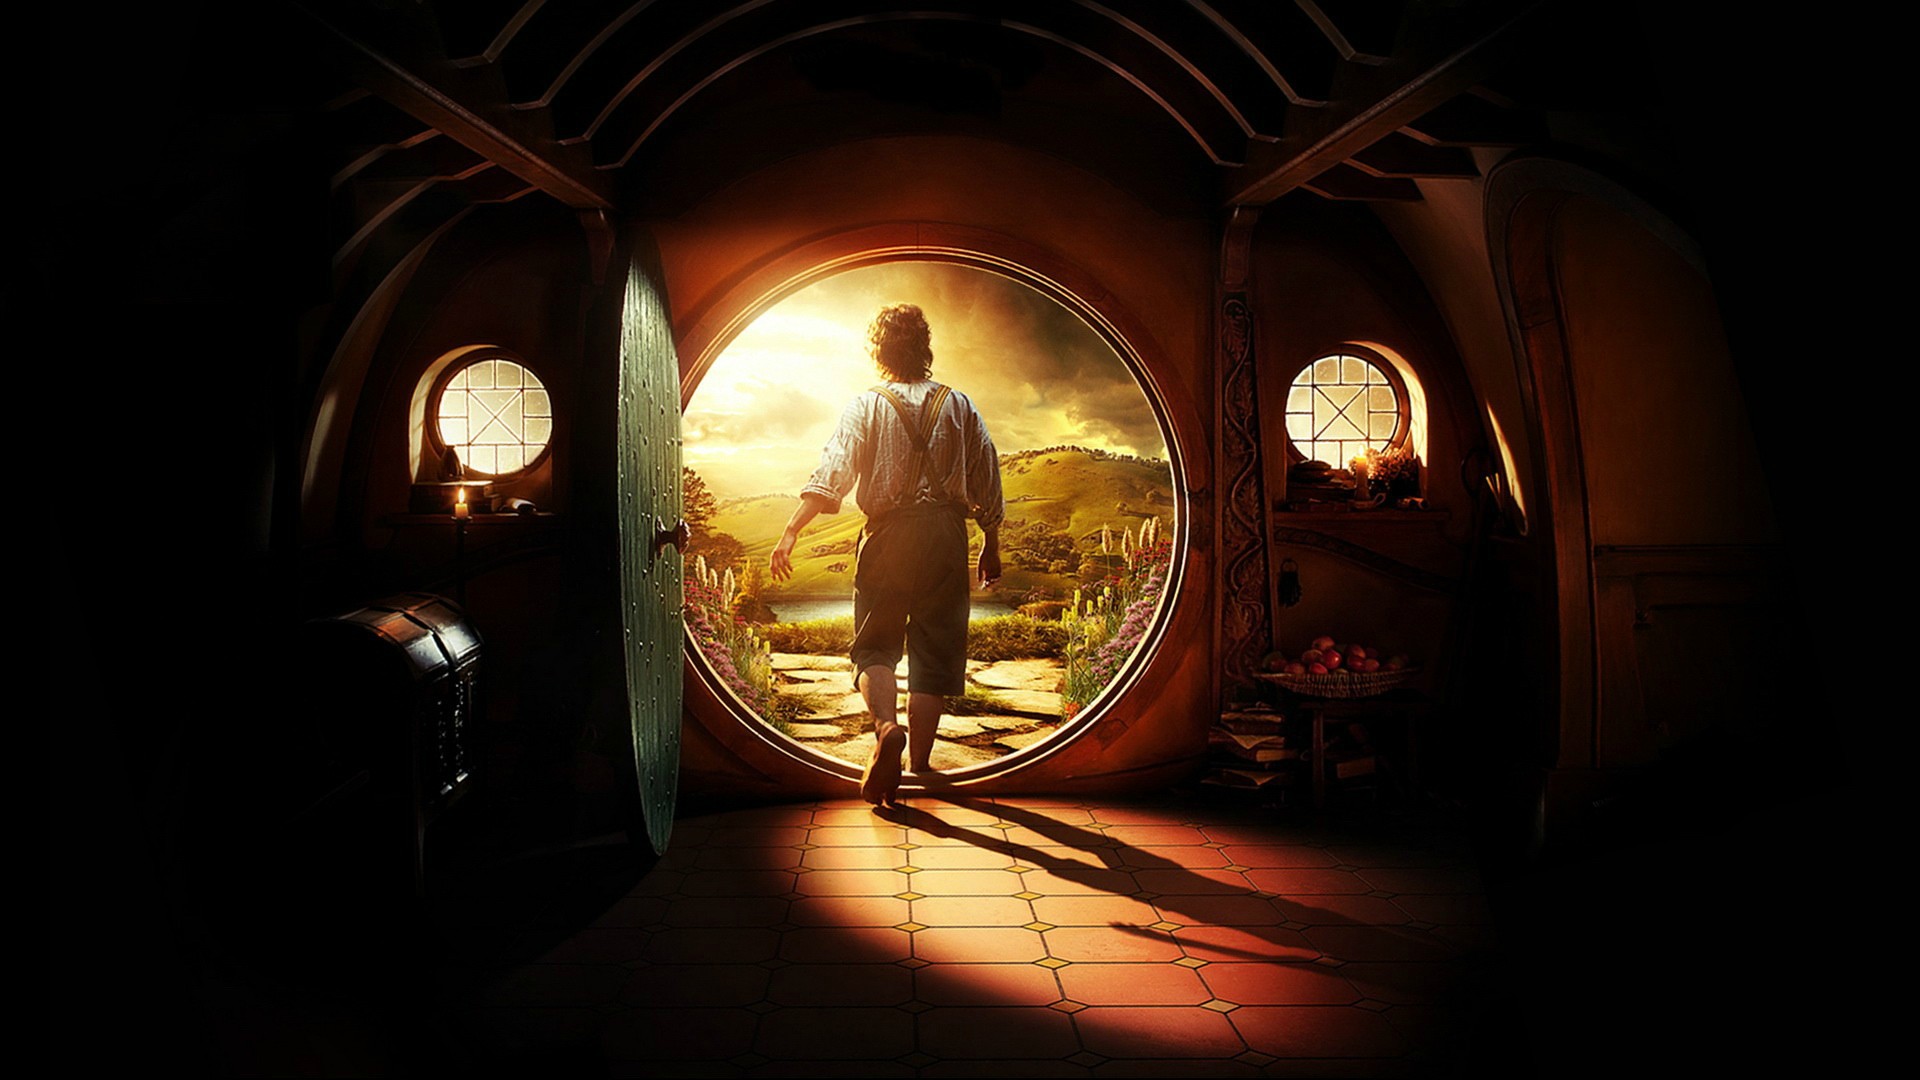 the hobbit: an unexpected journey, movie, the lord of the rings